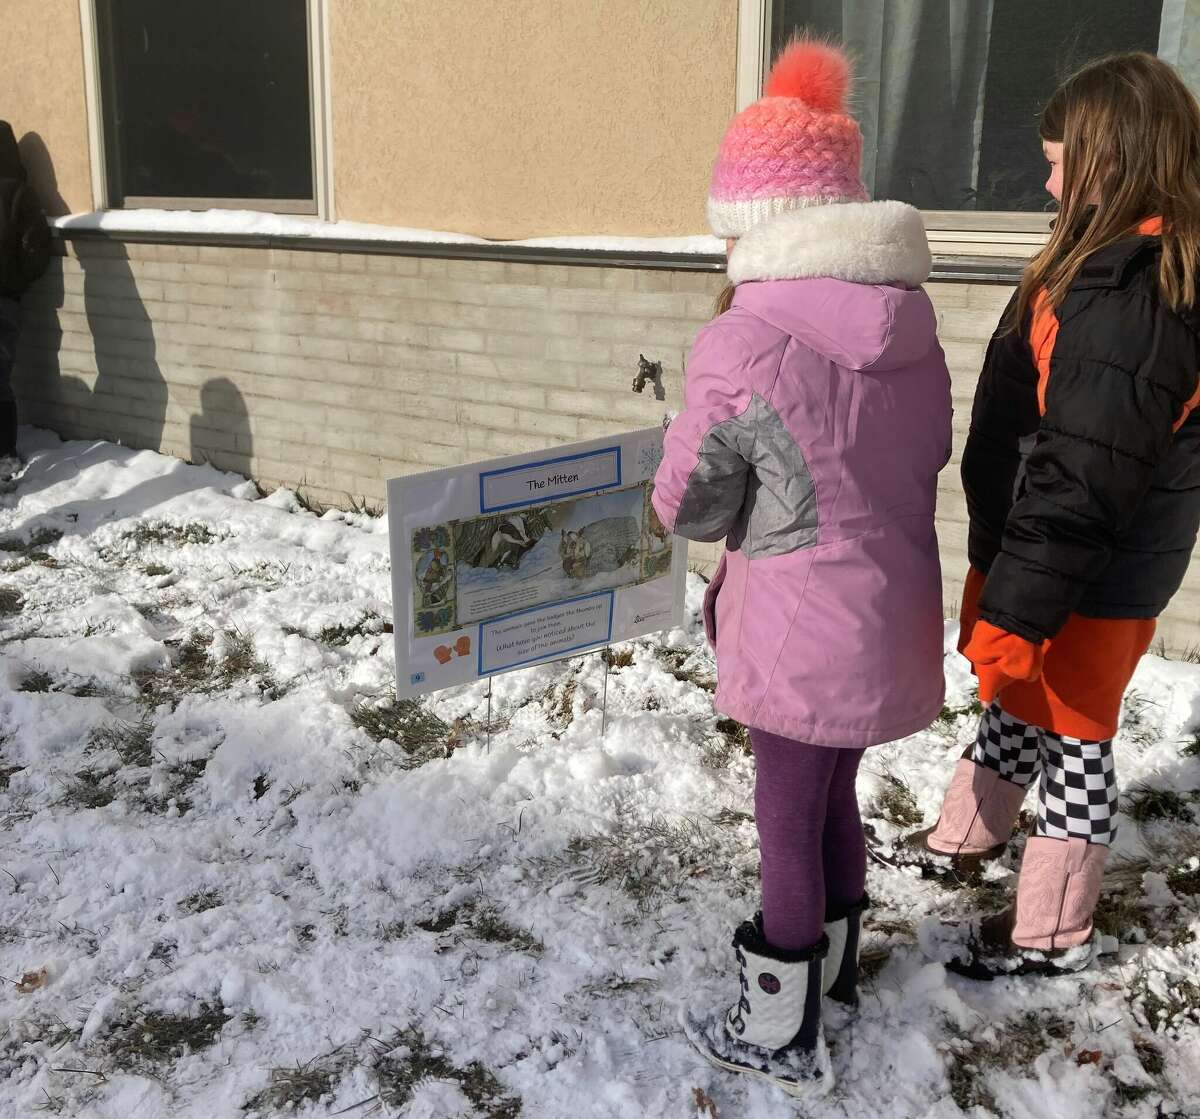 Elementary students at Bear Lake Schools read Jan Brett's "The Mitten" during a book walk provided by the Manistee Intermediate School District.